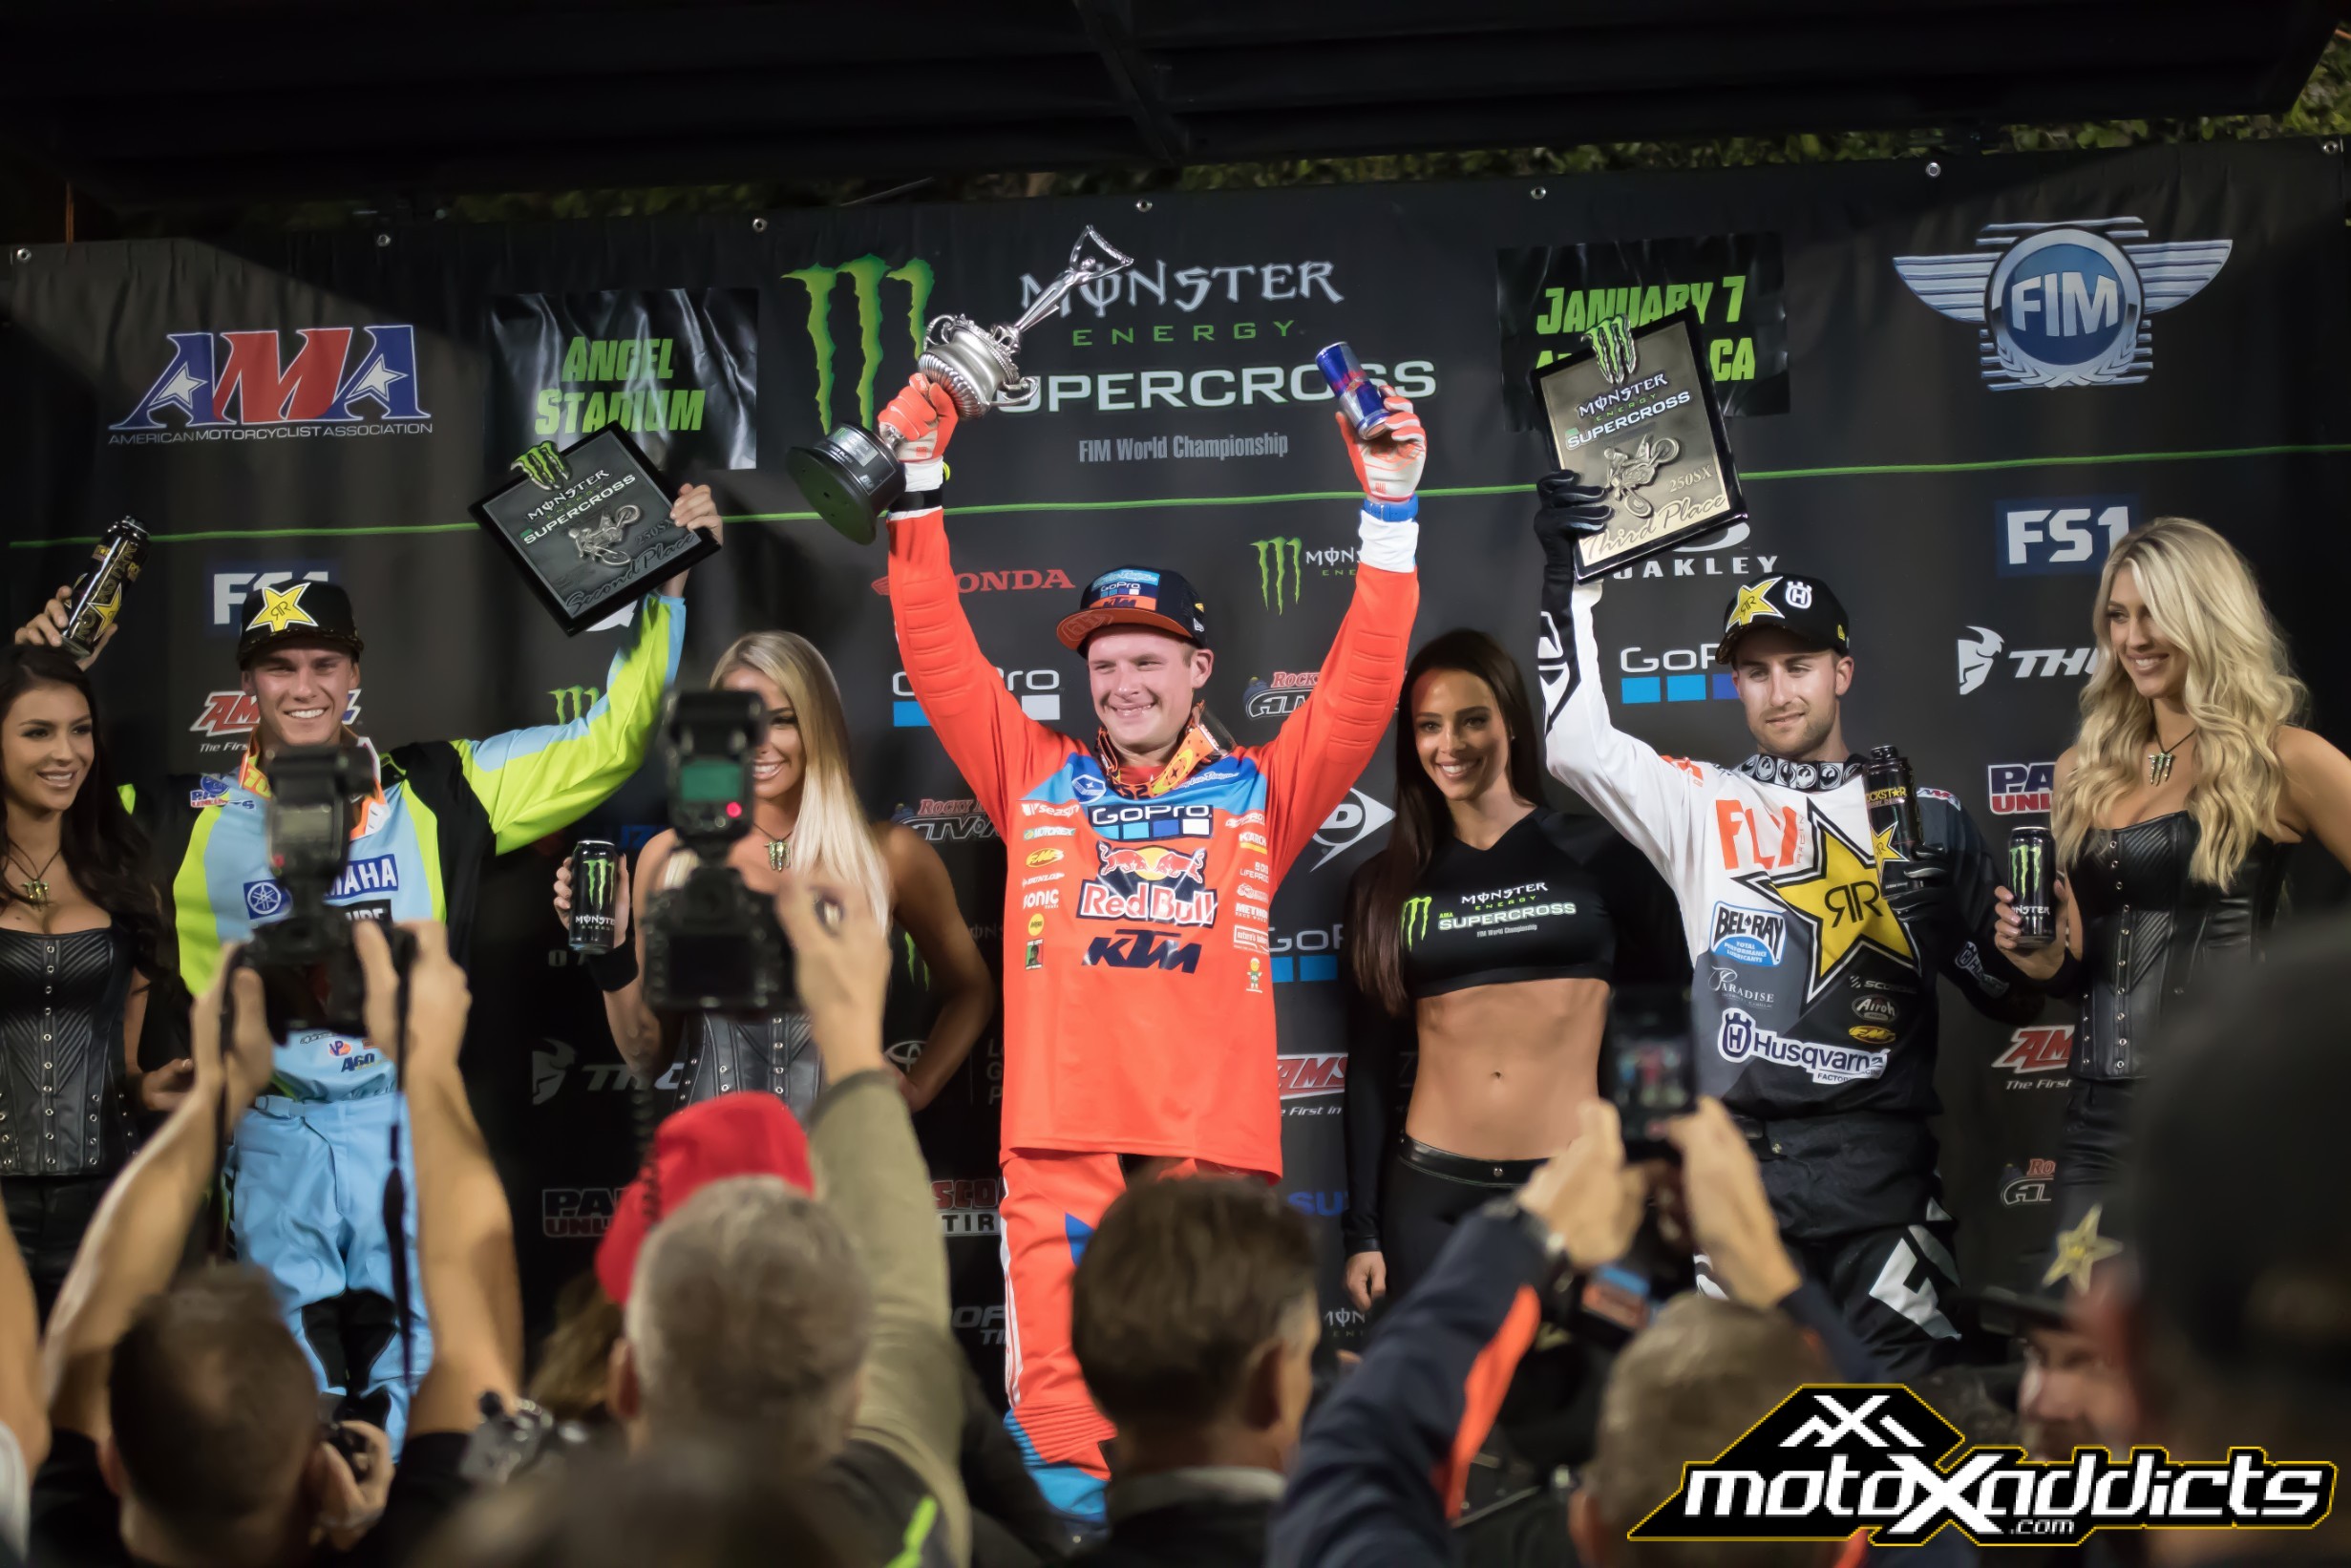 250SX podium. Shane McElrath (center), Aaron Plessinger (left) and Martin Davalos (right). Photo by: Chase Yocom